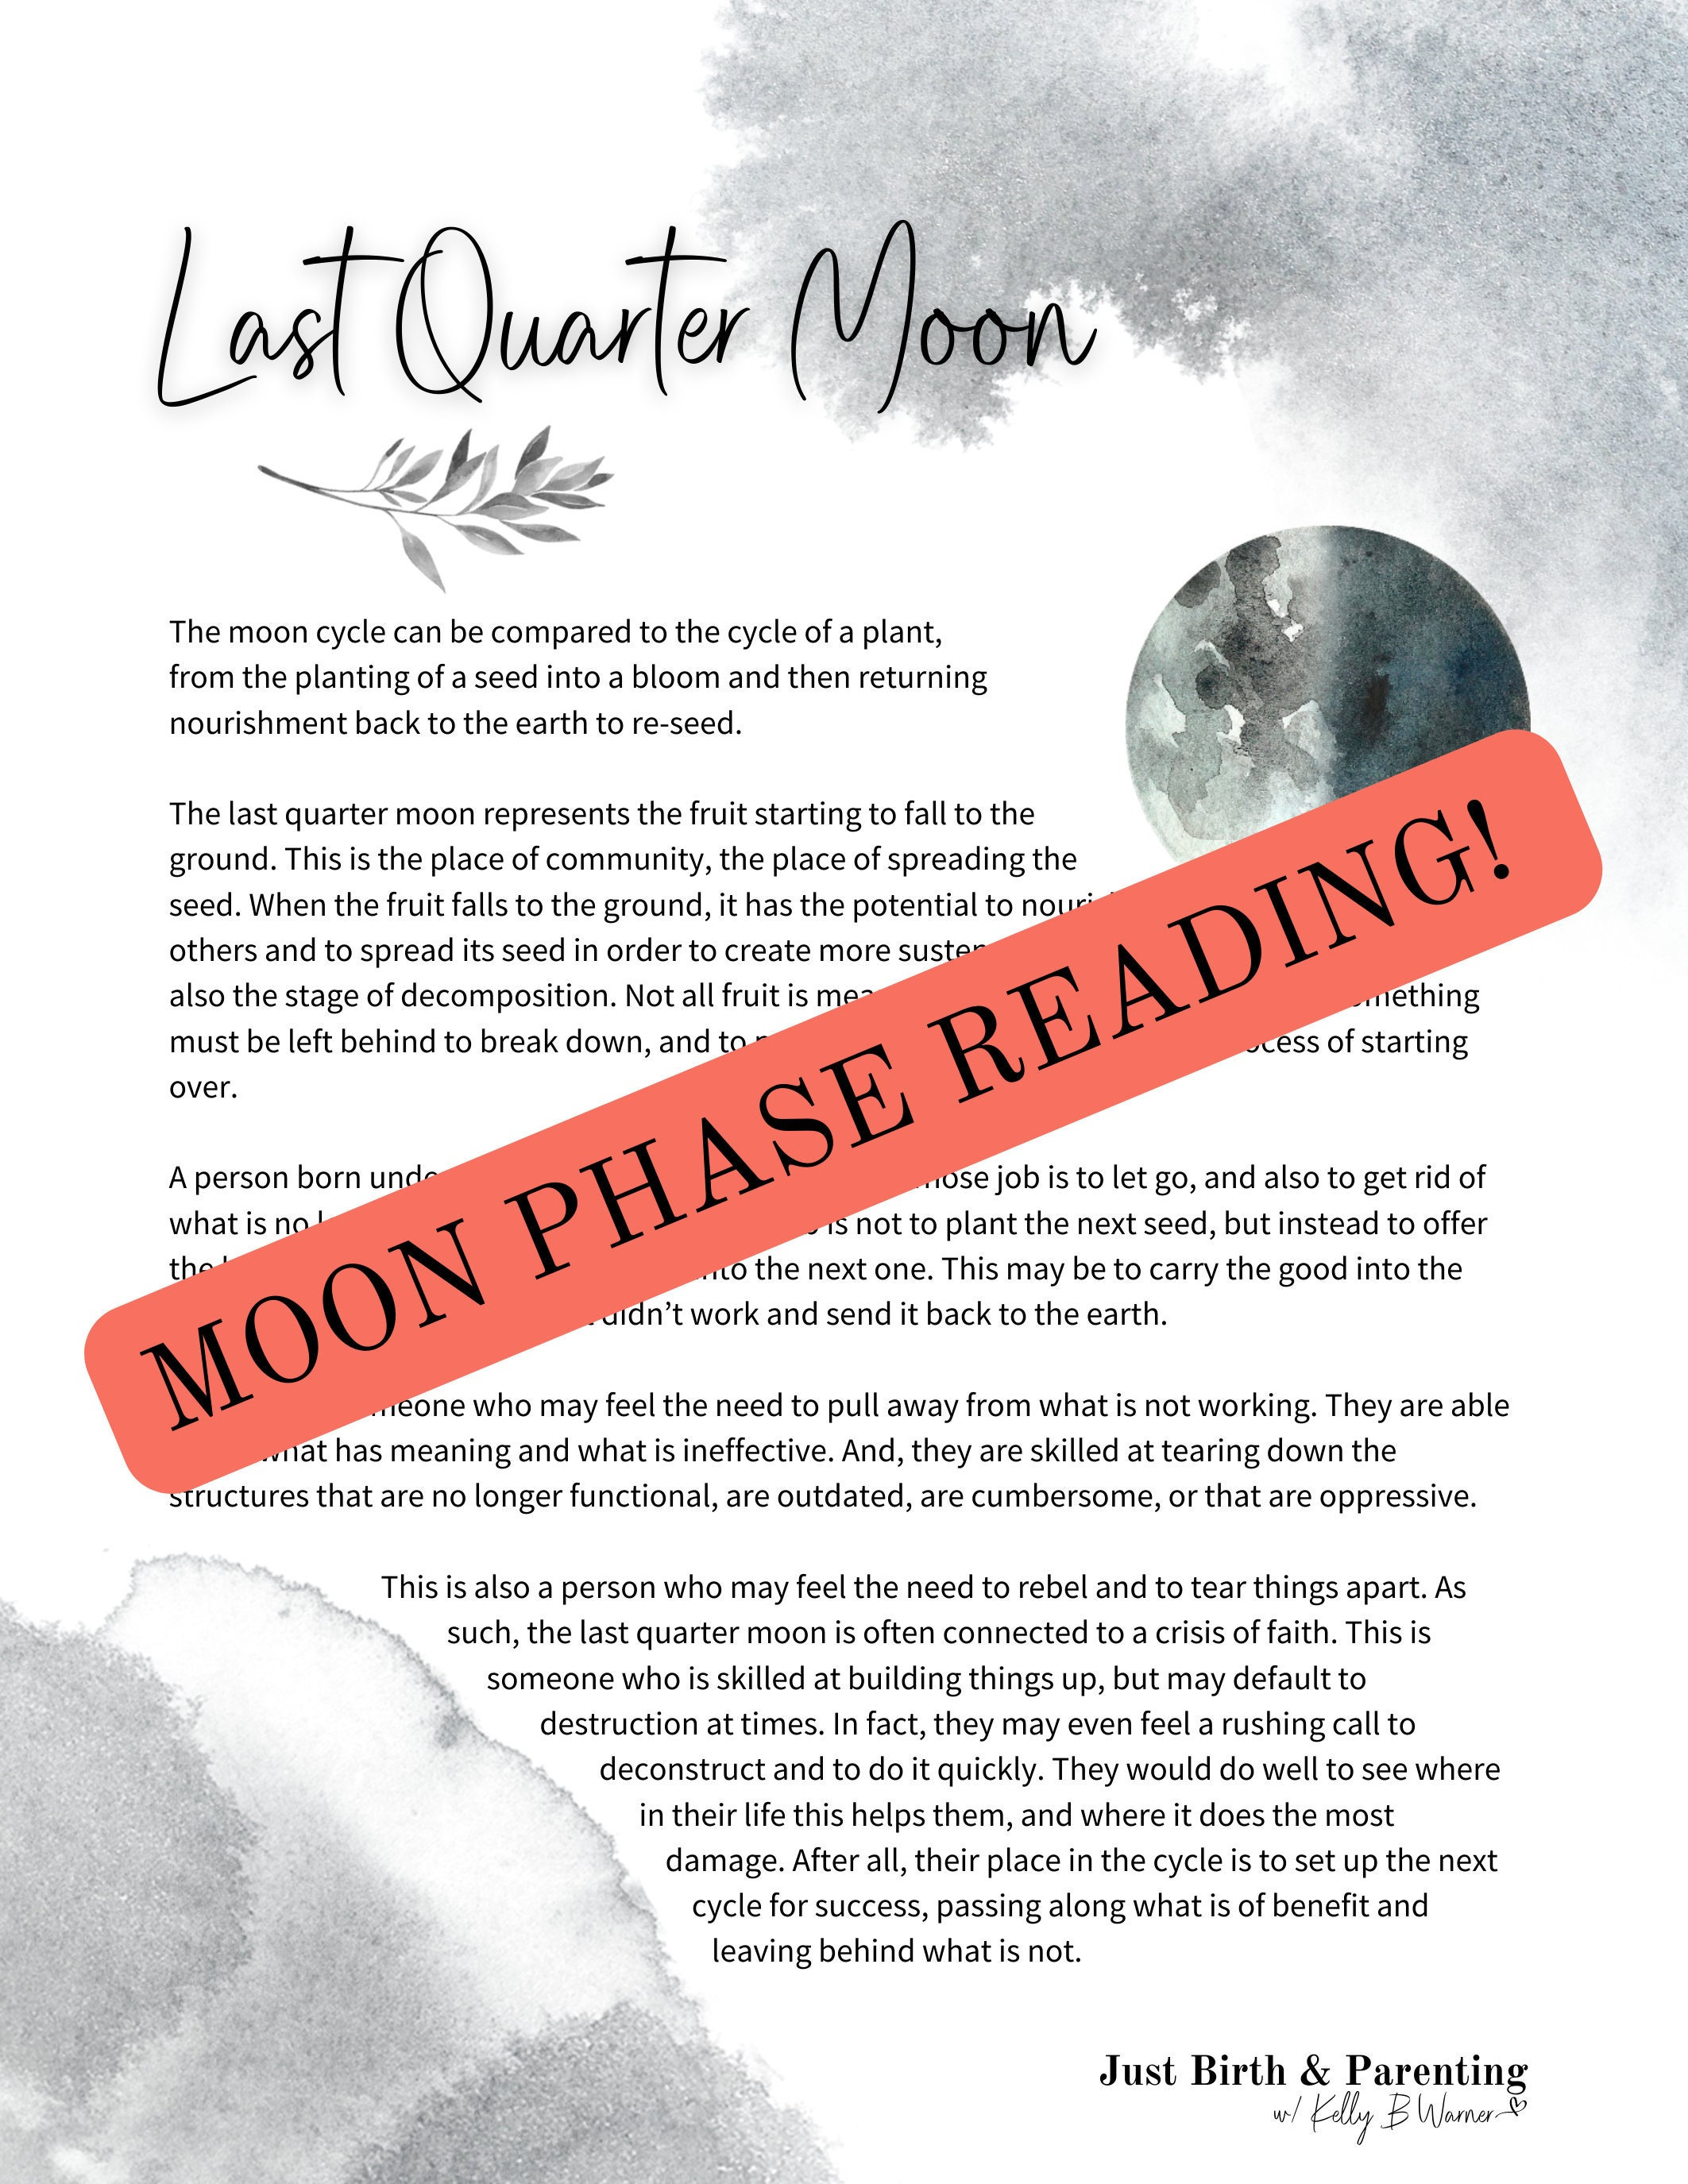 Sick And Tired Of Doing Moon Reading Review The Old Way? Read This